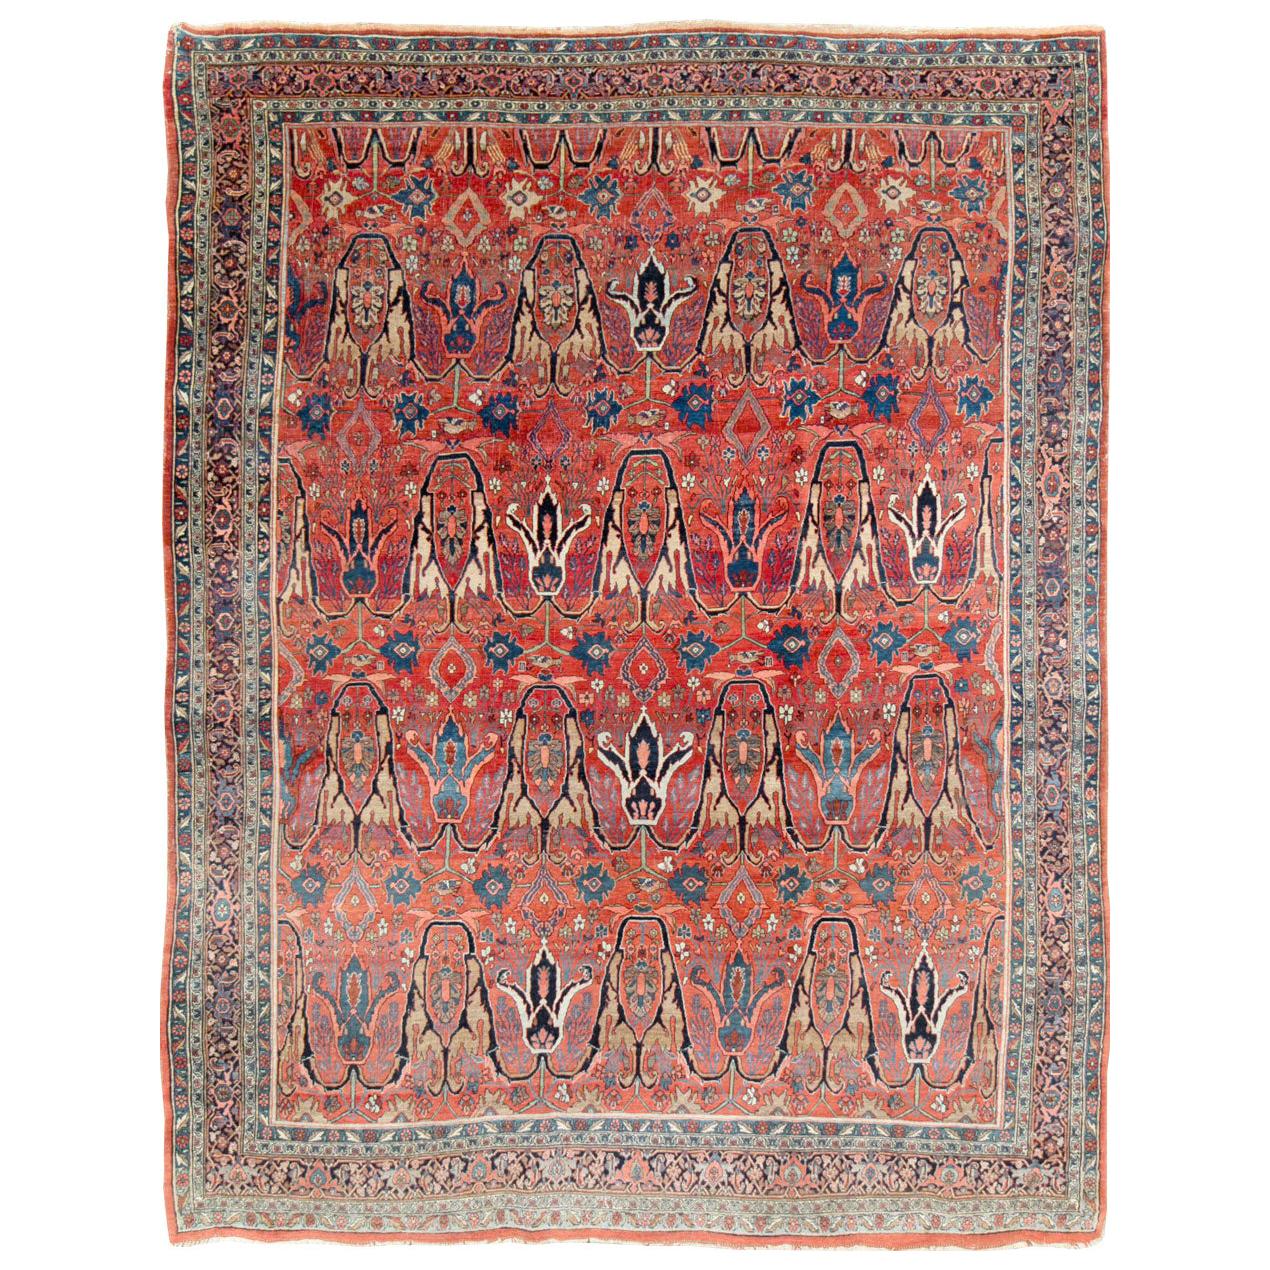 Early 20th Century Handmade Persian Bidjar Room Size Carpet in Red and Blue For Sale